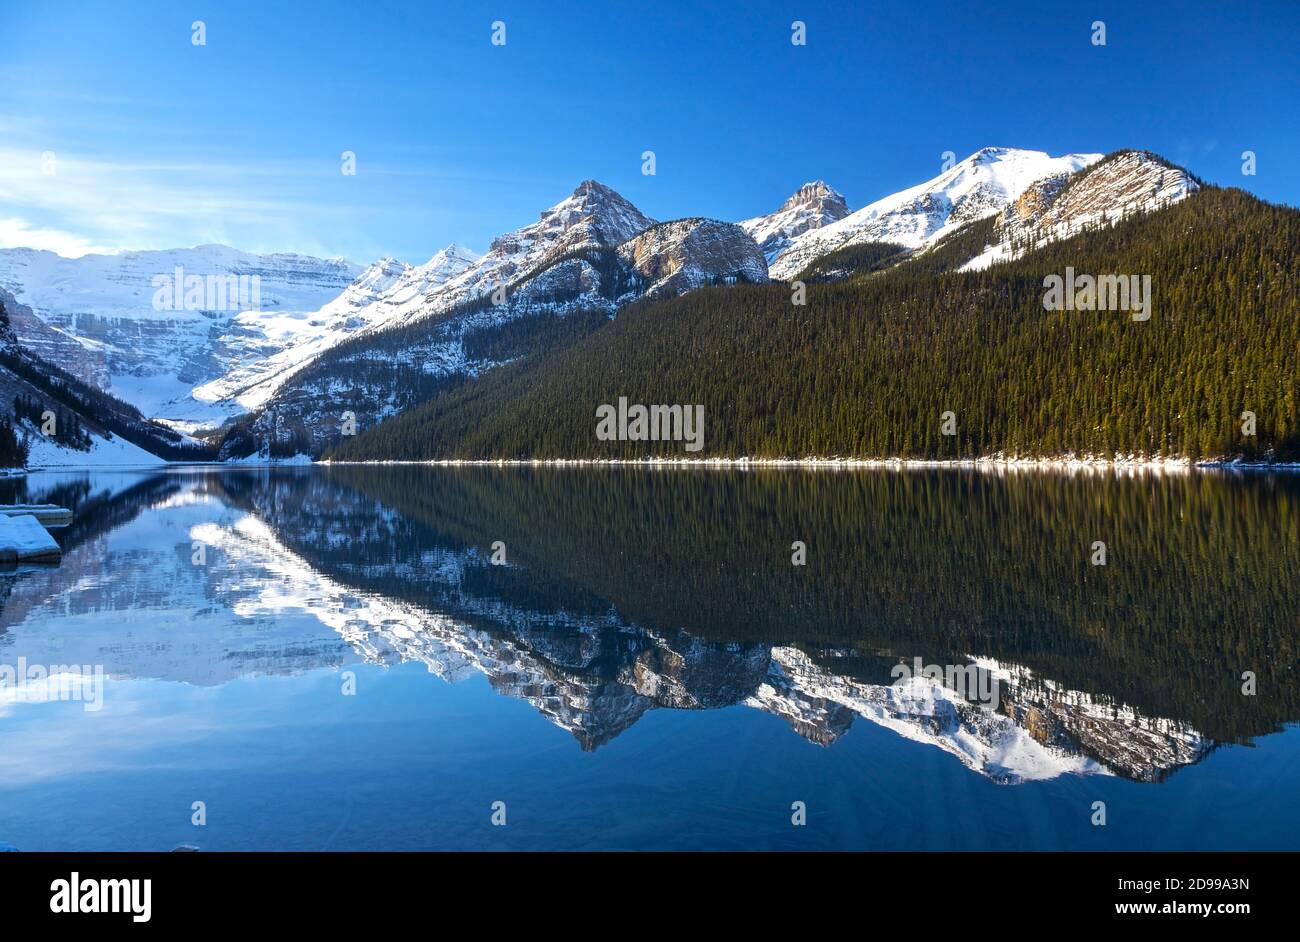 Scenic Landscape View of Lake Louise Shore with Rocky Mountain Peaks reflected in Calm Blue Water, Banff National Park, Canadian Rockies Stock Photo